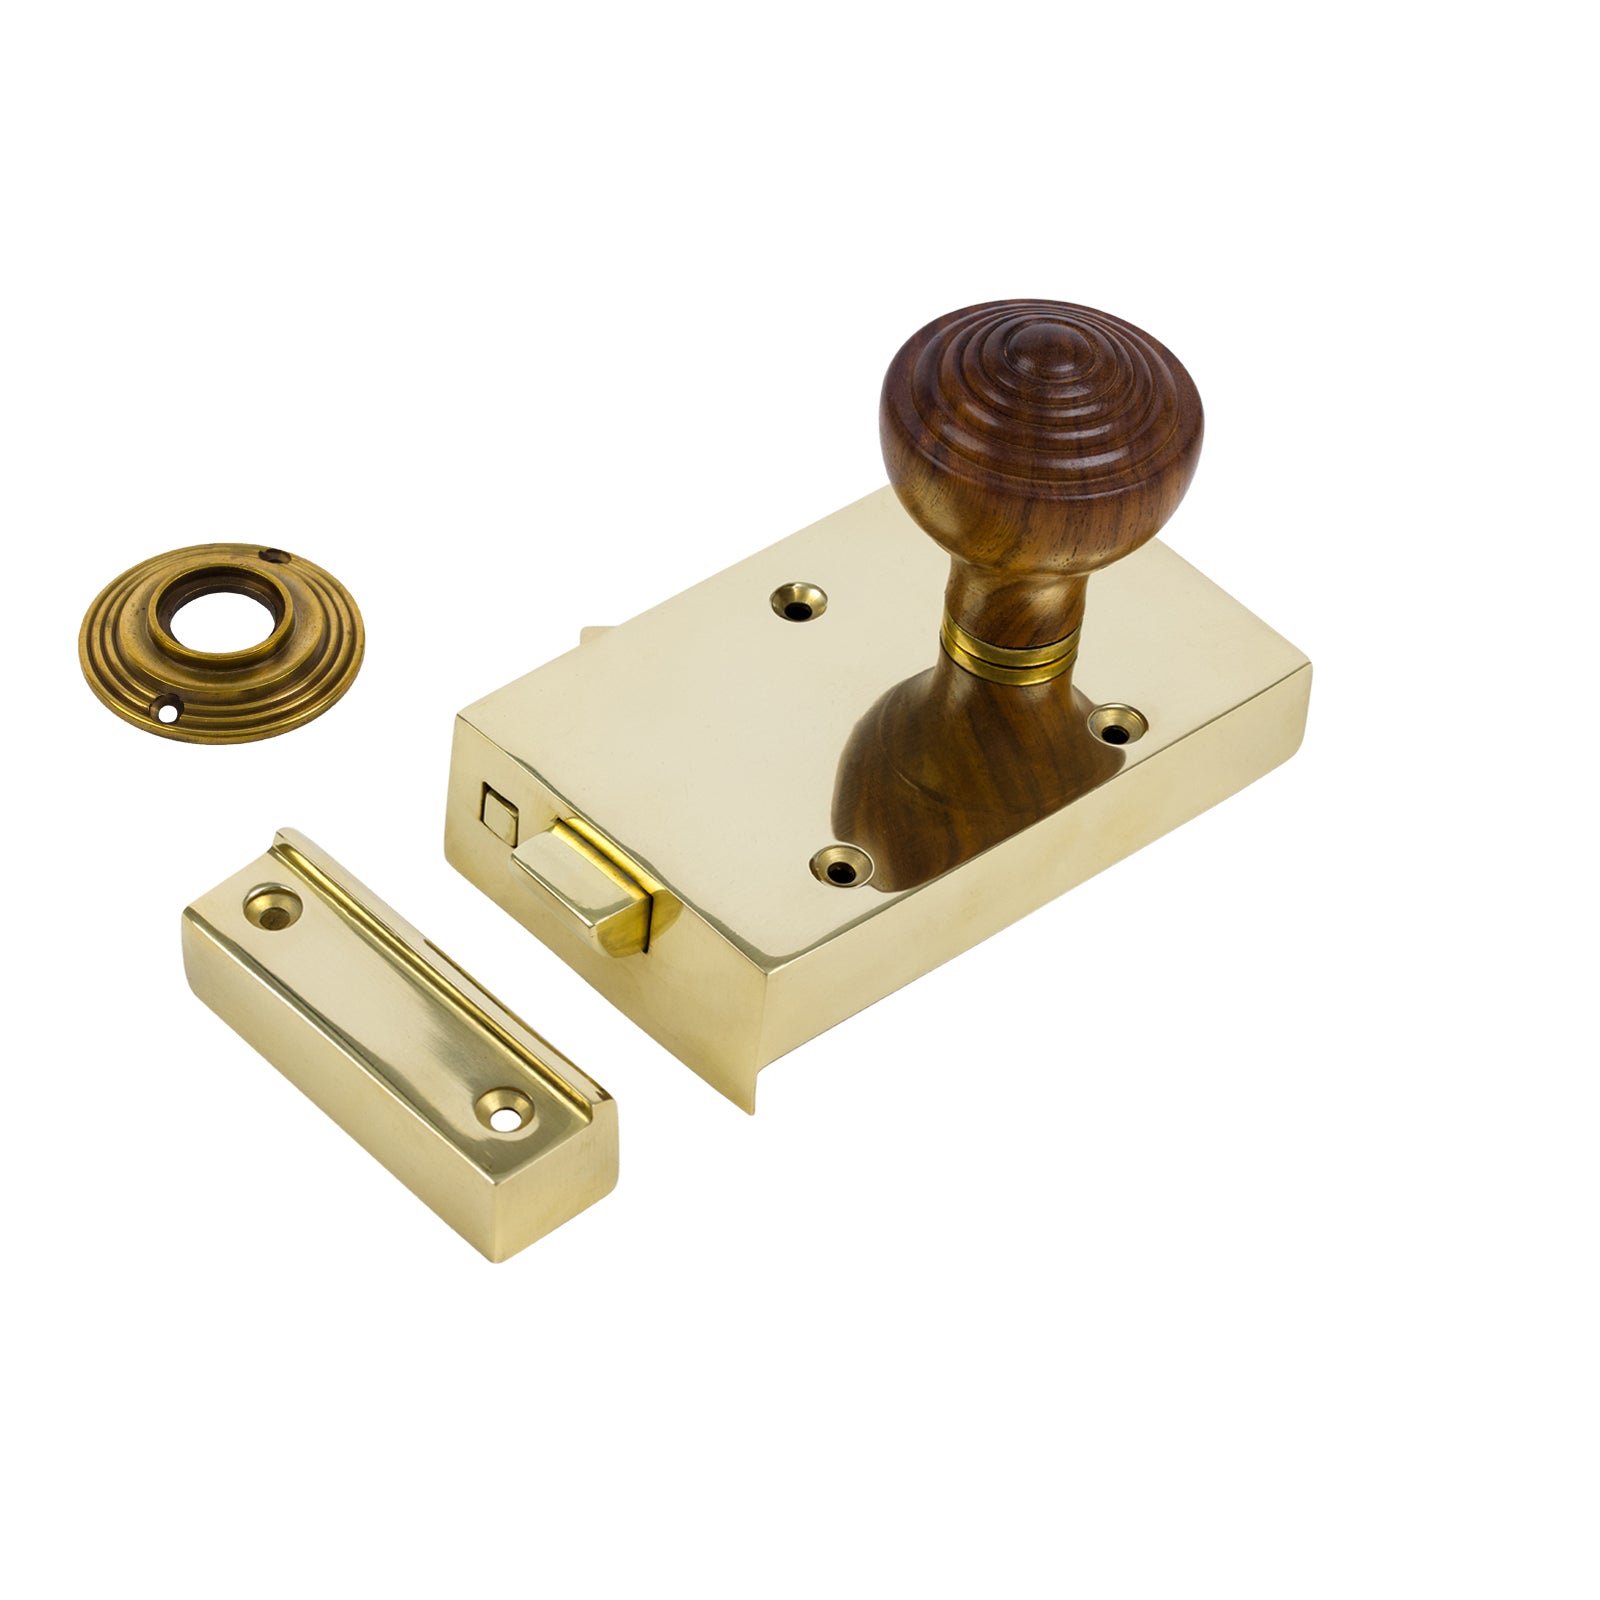 SHOW Right Handed Brass Bathroom Rim Lock with Ringed Door Knob Set - Rosewood